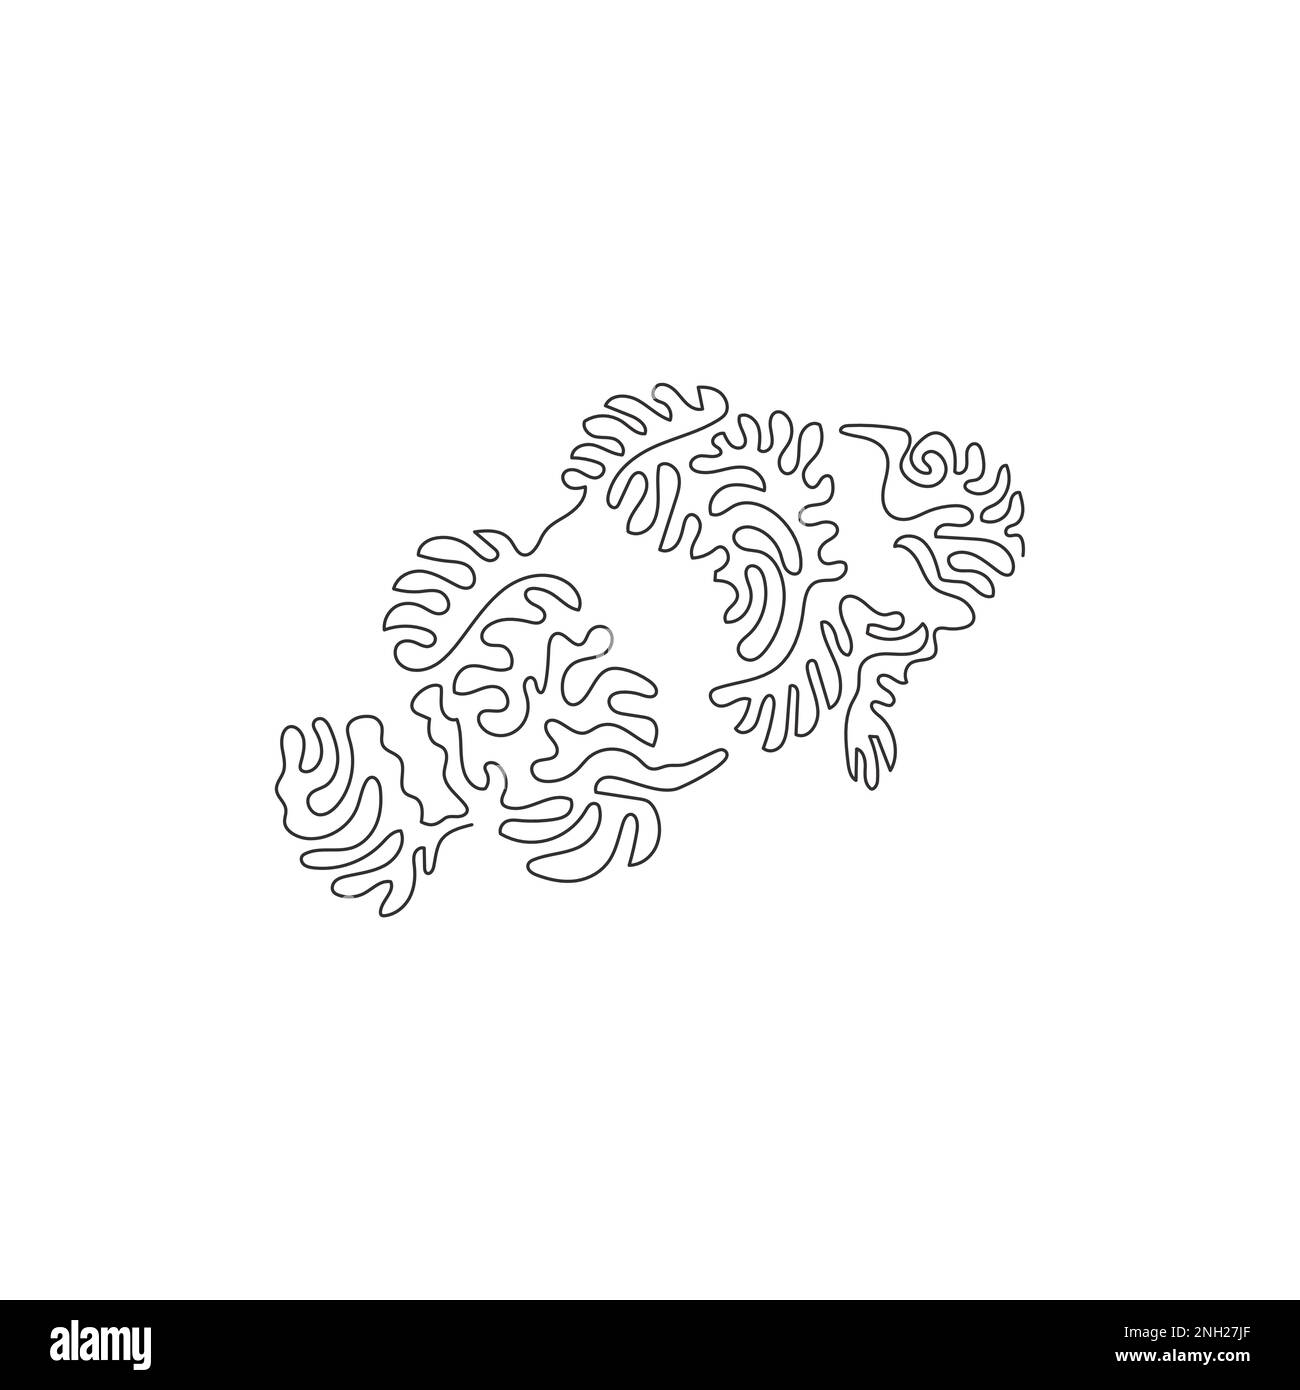 Continuous curve one line drawing of beautiful clownfish abstract art in circle. Single line editable stroke vector illustration of adorable clownfish Stock Vector